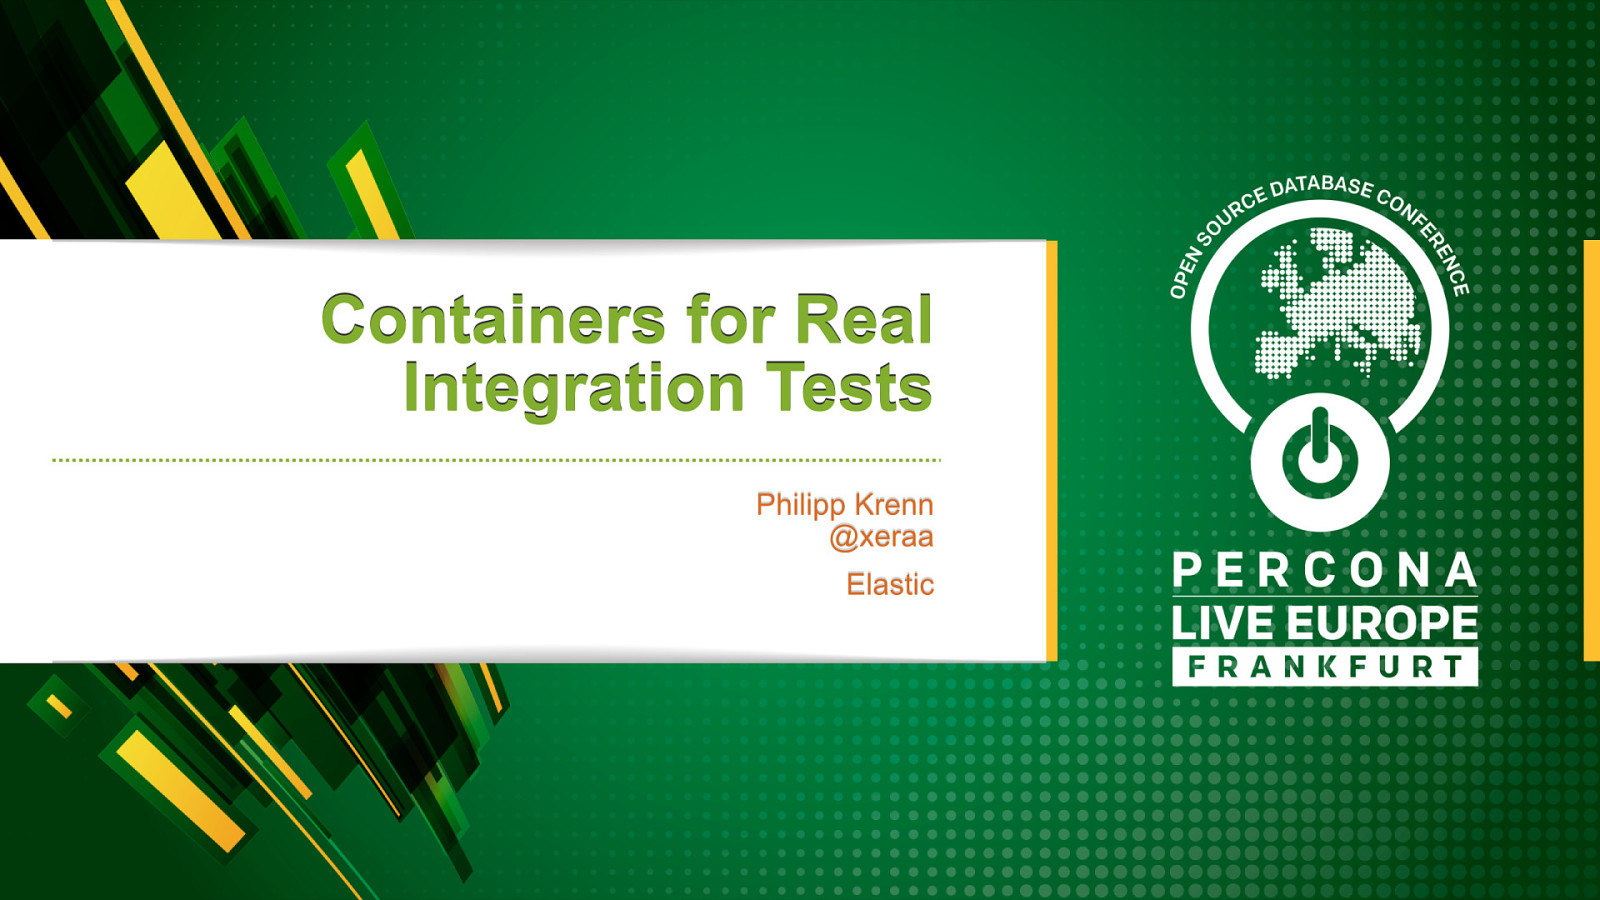 Containers for Real Integration Tests